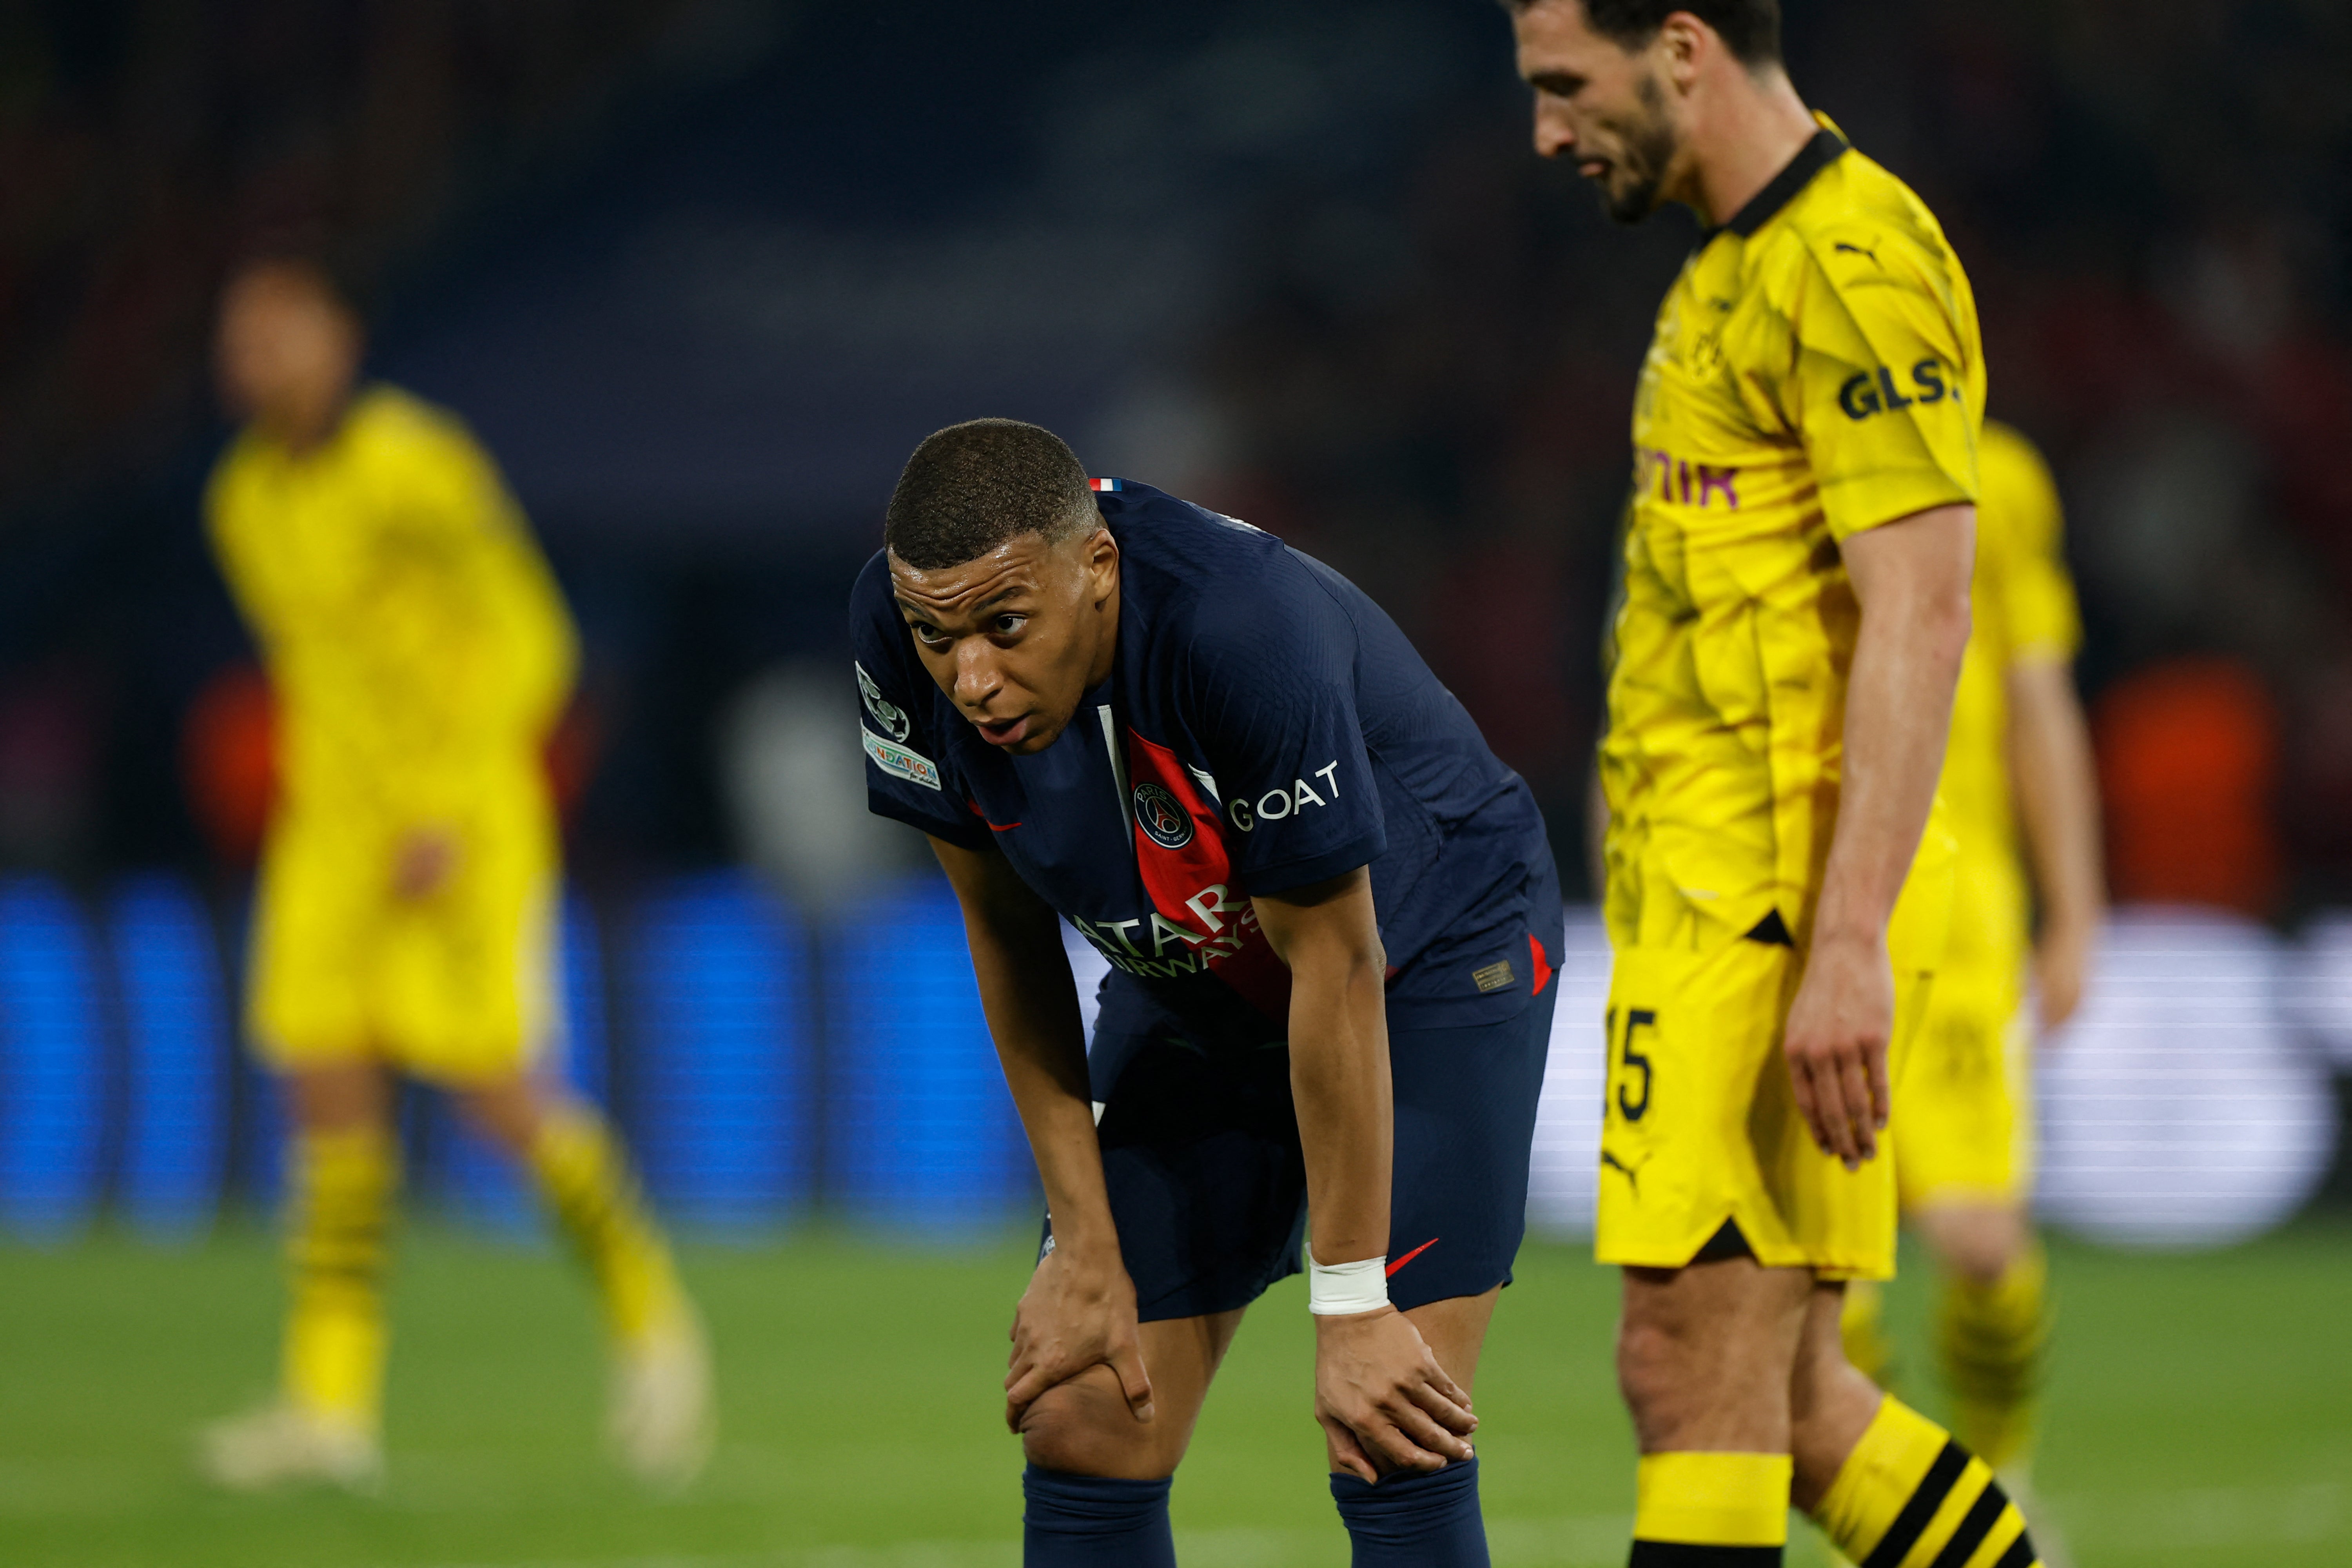 Dortmund advanced to the Champions League final at the expense of Mbappe and PSG